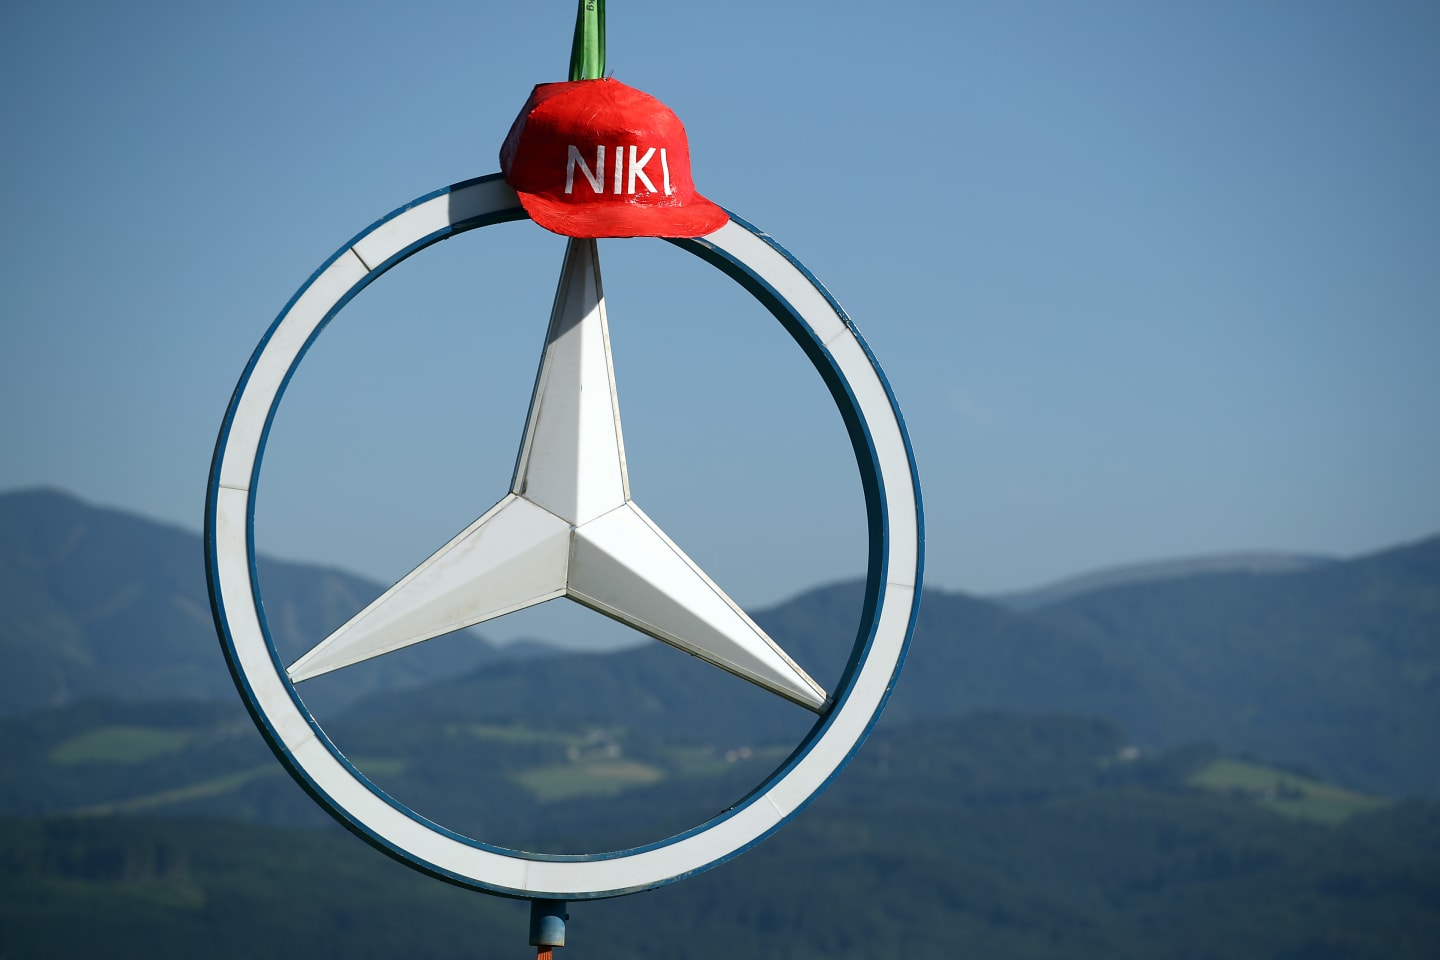 SPIELBERG, AUSTRIA - JUNE 29: A fan tribute to the late Niki Lauda is seen after qualifying for the